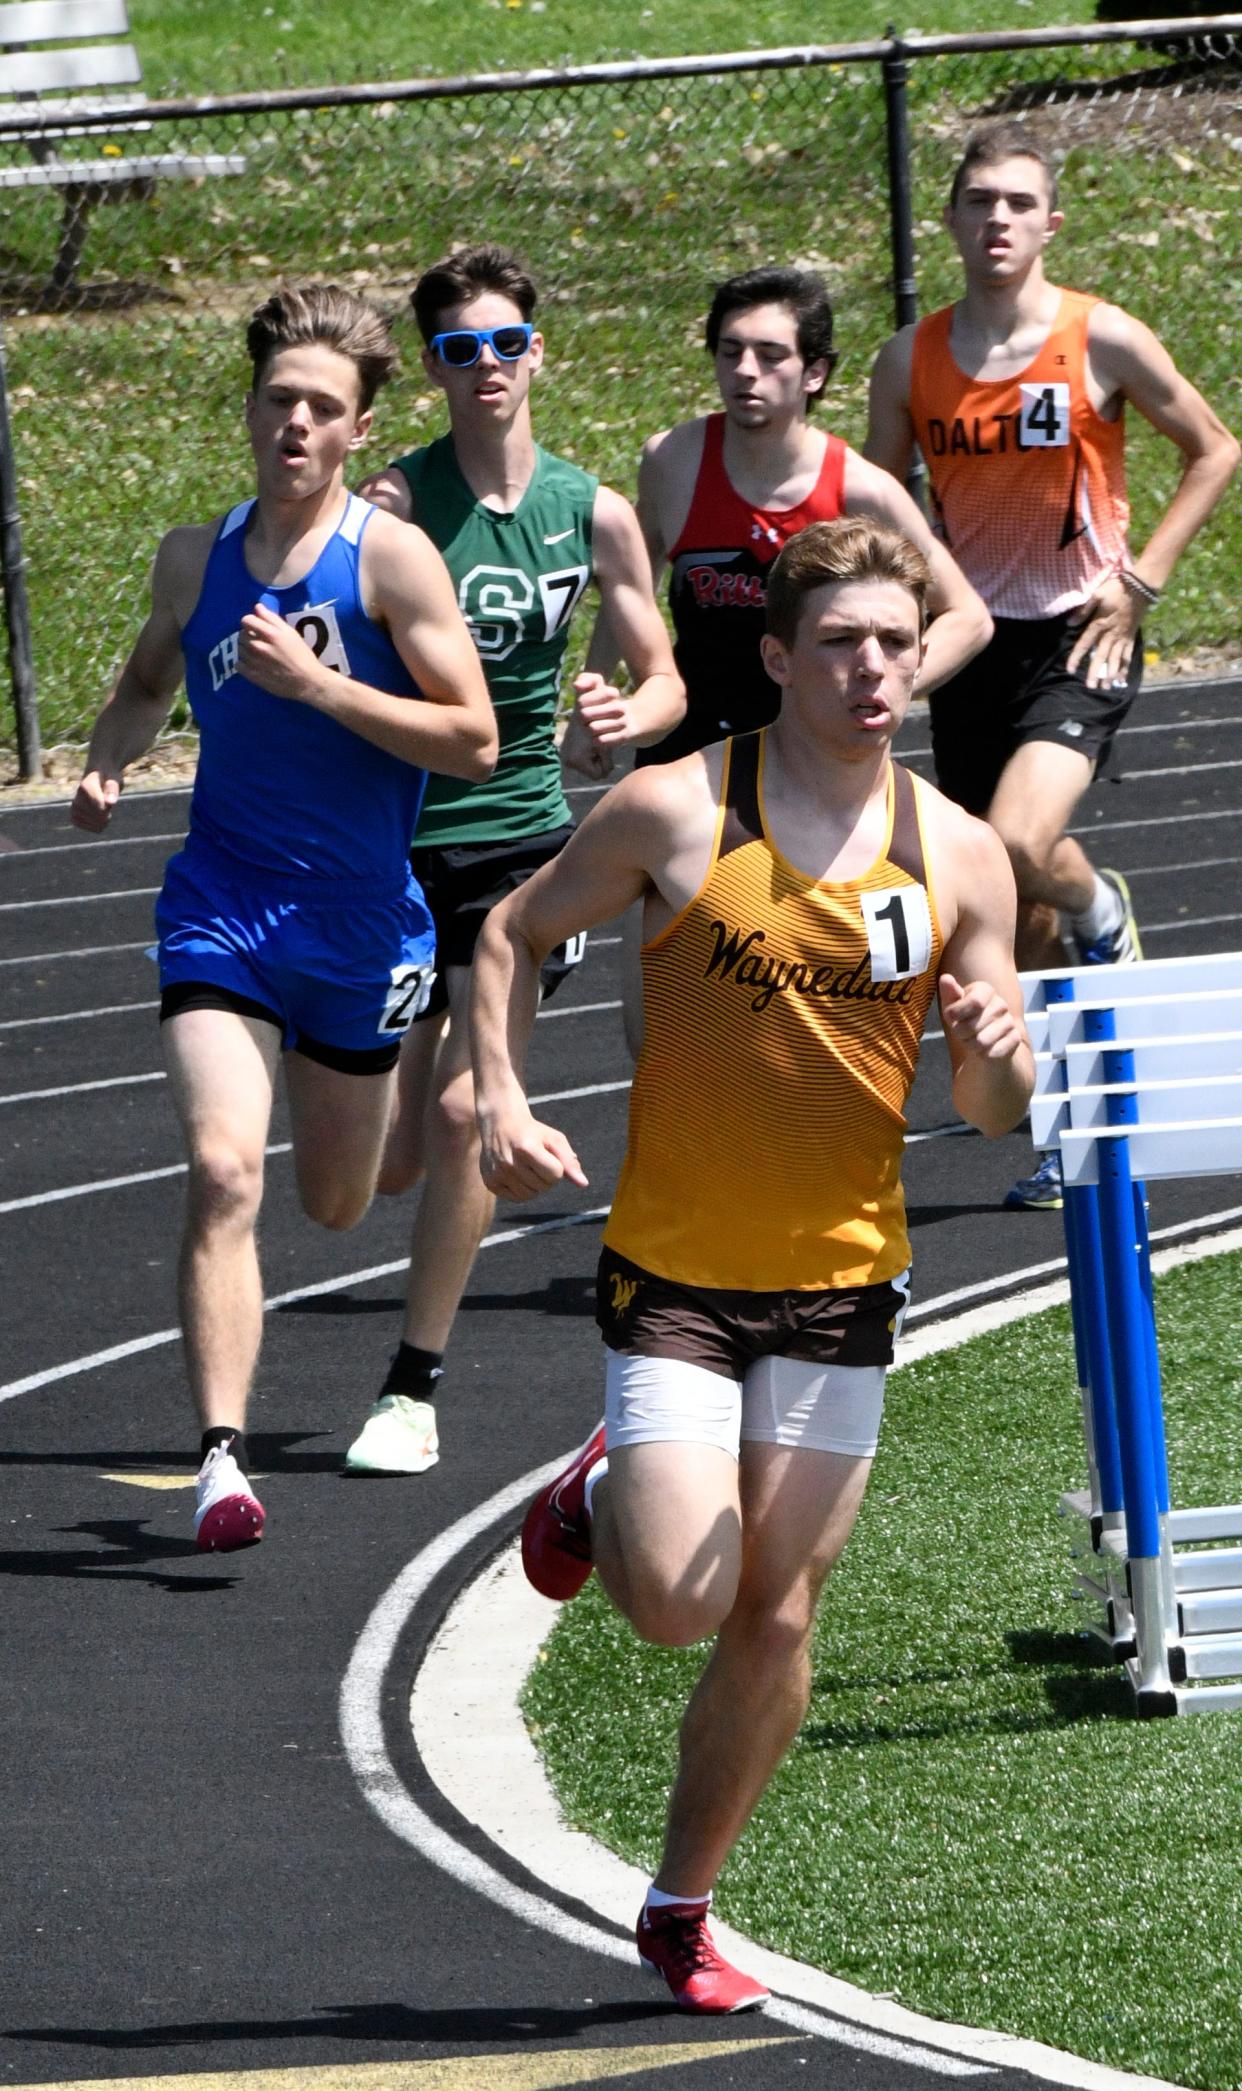 Waynedale's JJ Varner leads the pack on the first lap of the boys 1,600 meter run on his way to winning the event.